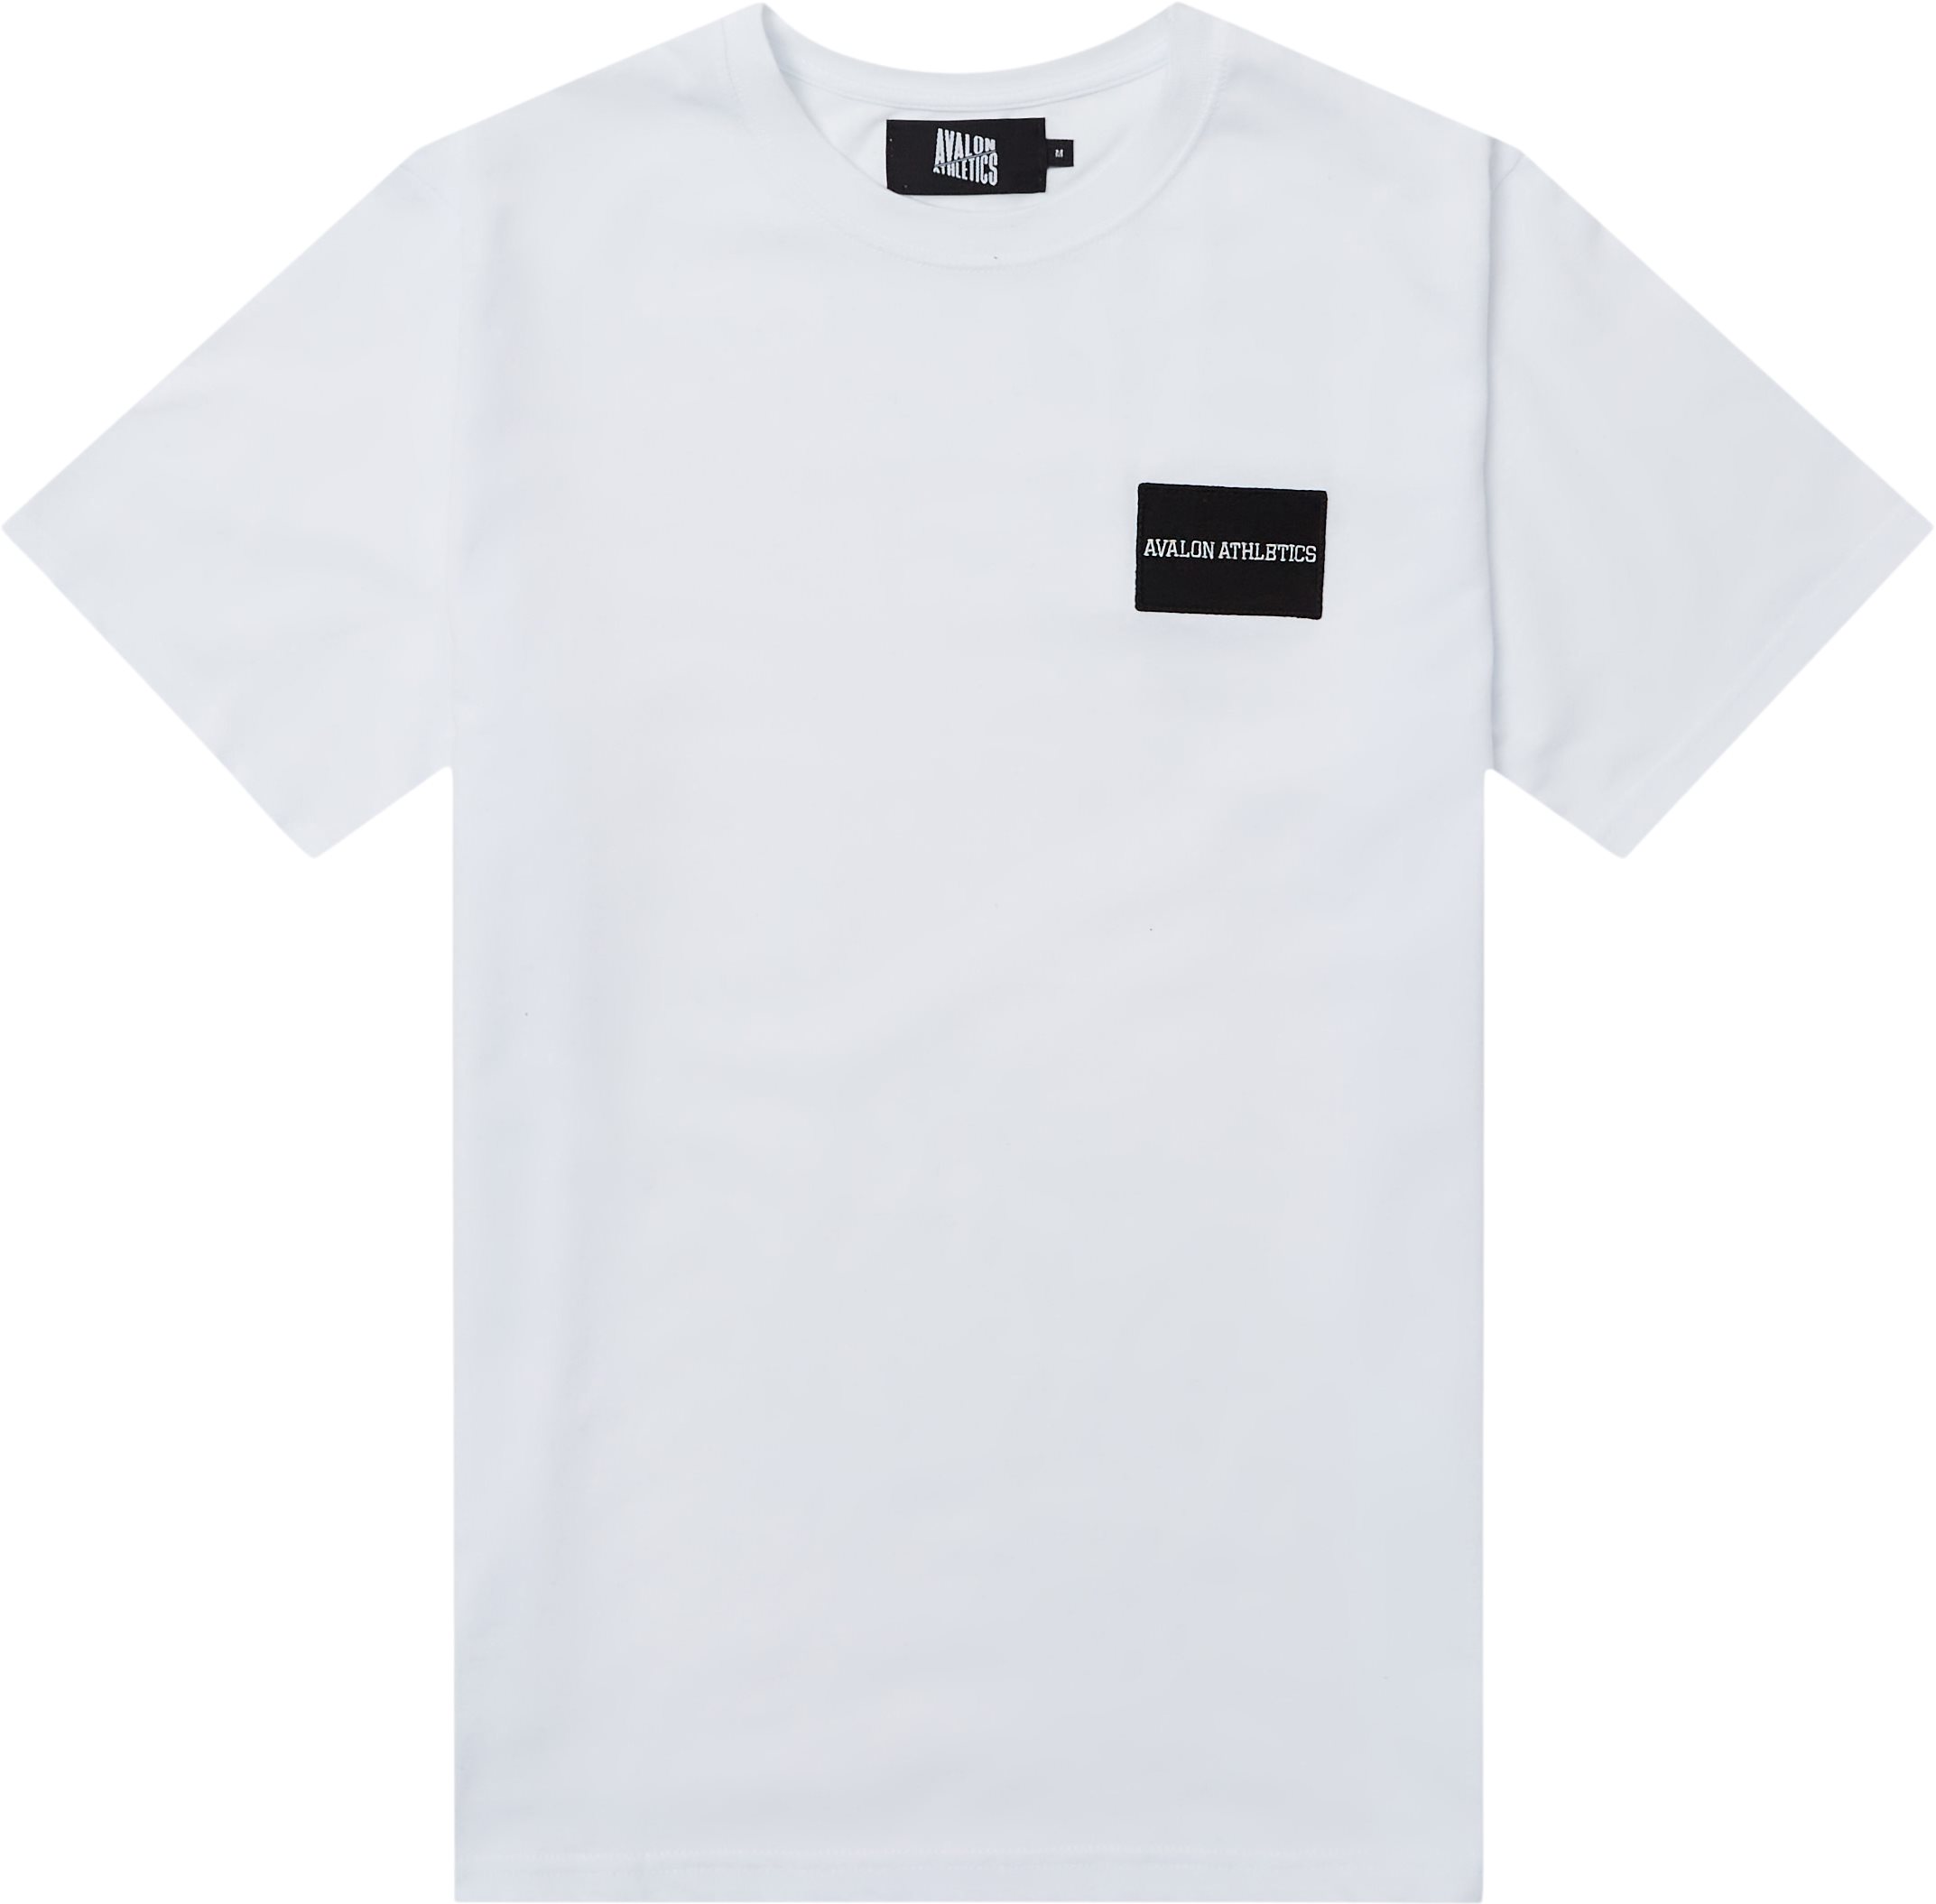 Fisher Tee - T-shirts - Regular fit - White